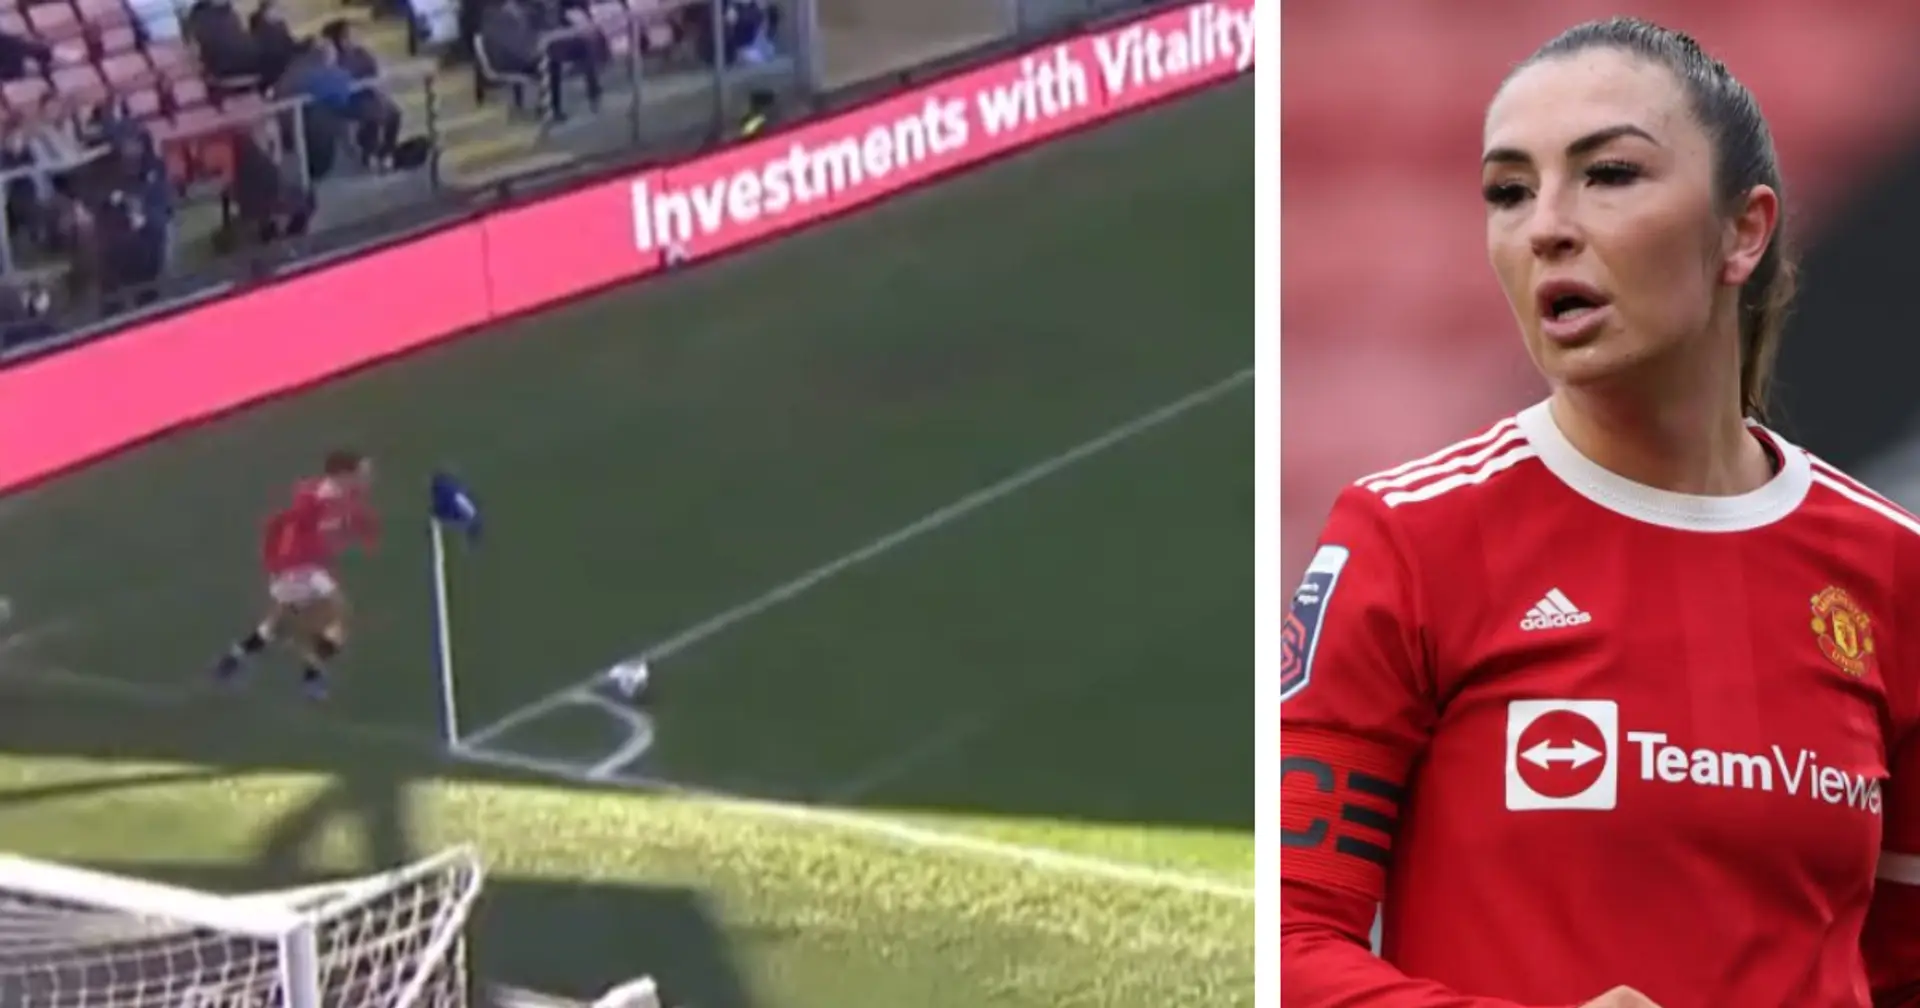 'Give the men some tips in training': Man United fans in awe of Katie Zelem's direct goal from corner